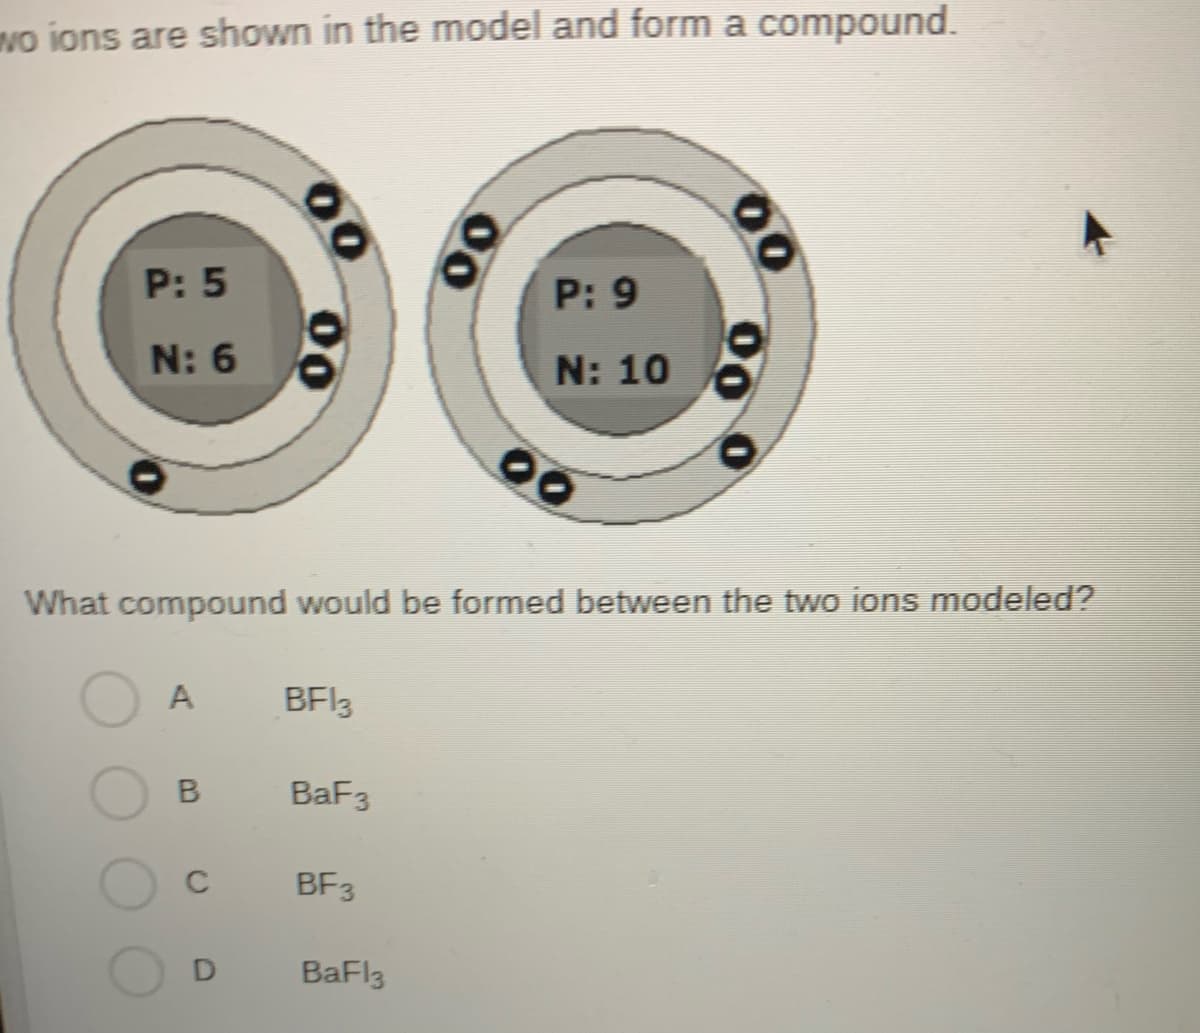 wo ions are shown in the model and form a compound.
P: 5
N: 6
A
B
C
00
D
What compound would be formed between the two ions modeled?
BF13
BaF3
BF3
P: 9
N: 10
BaFl3
00
00
00